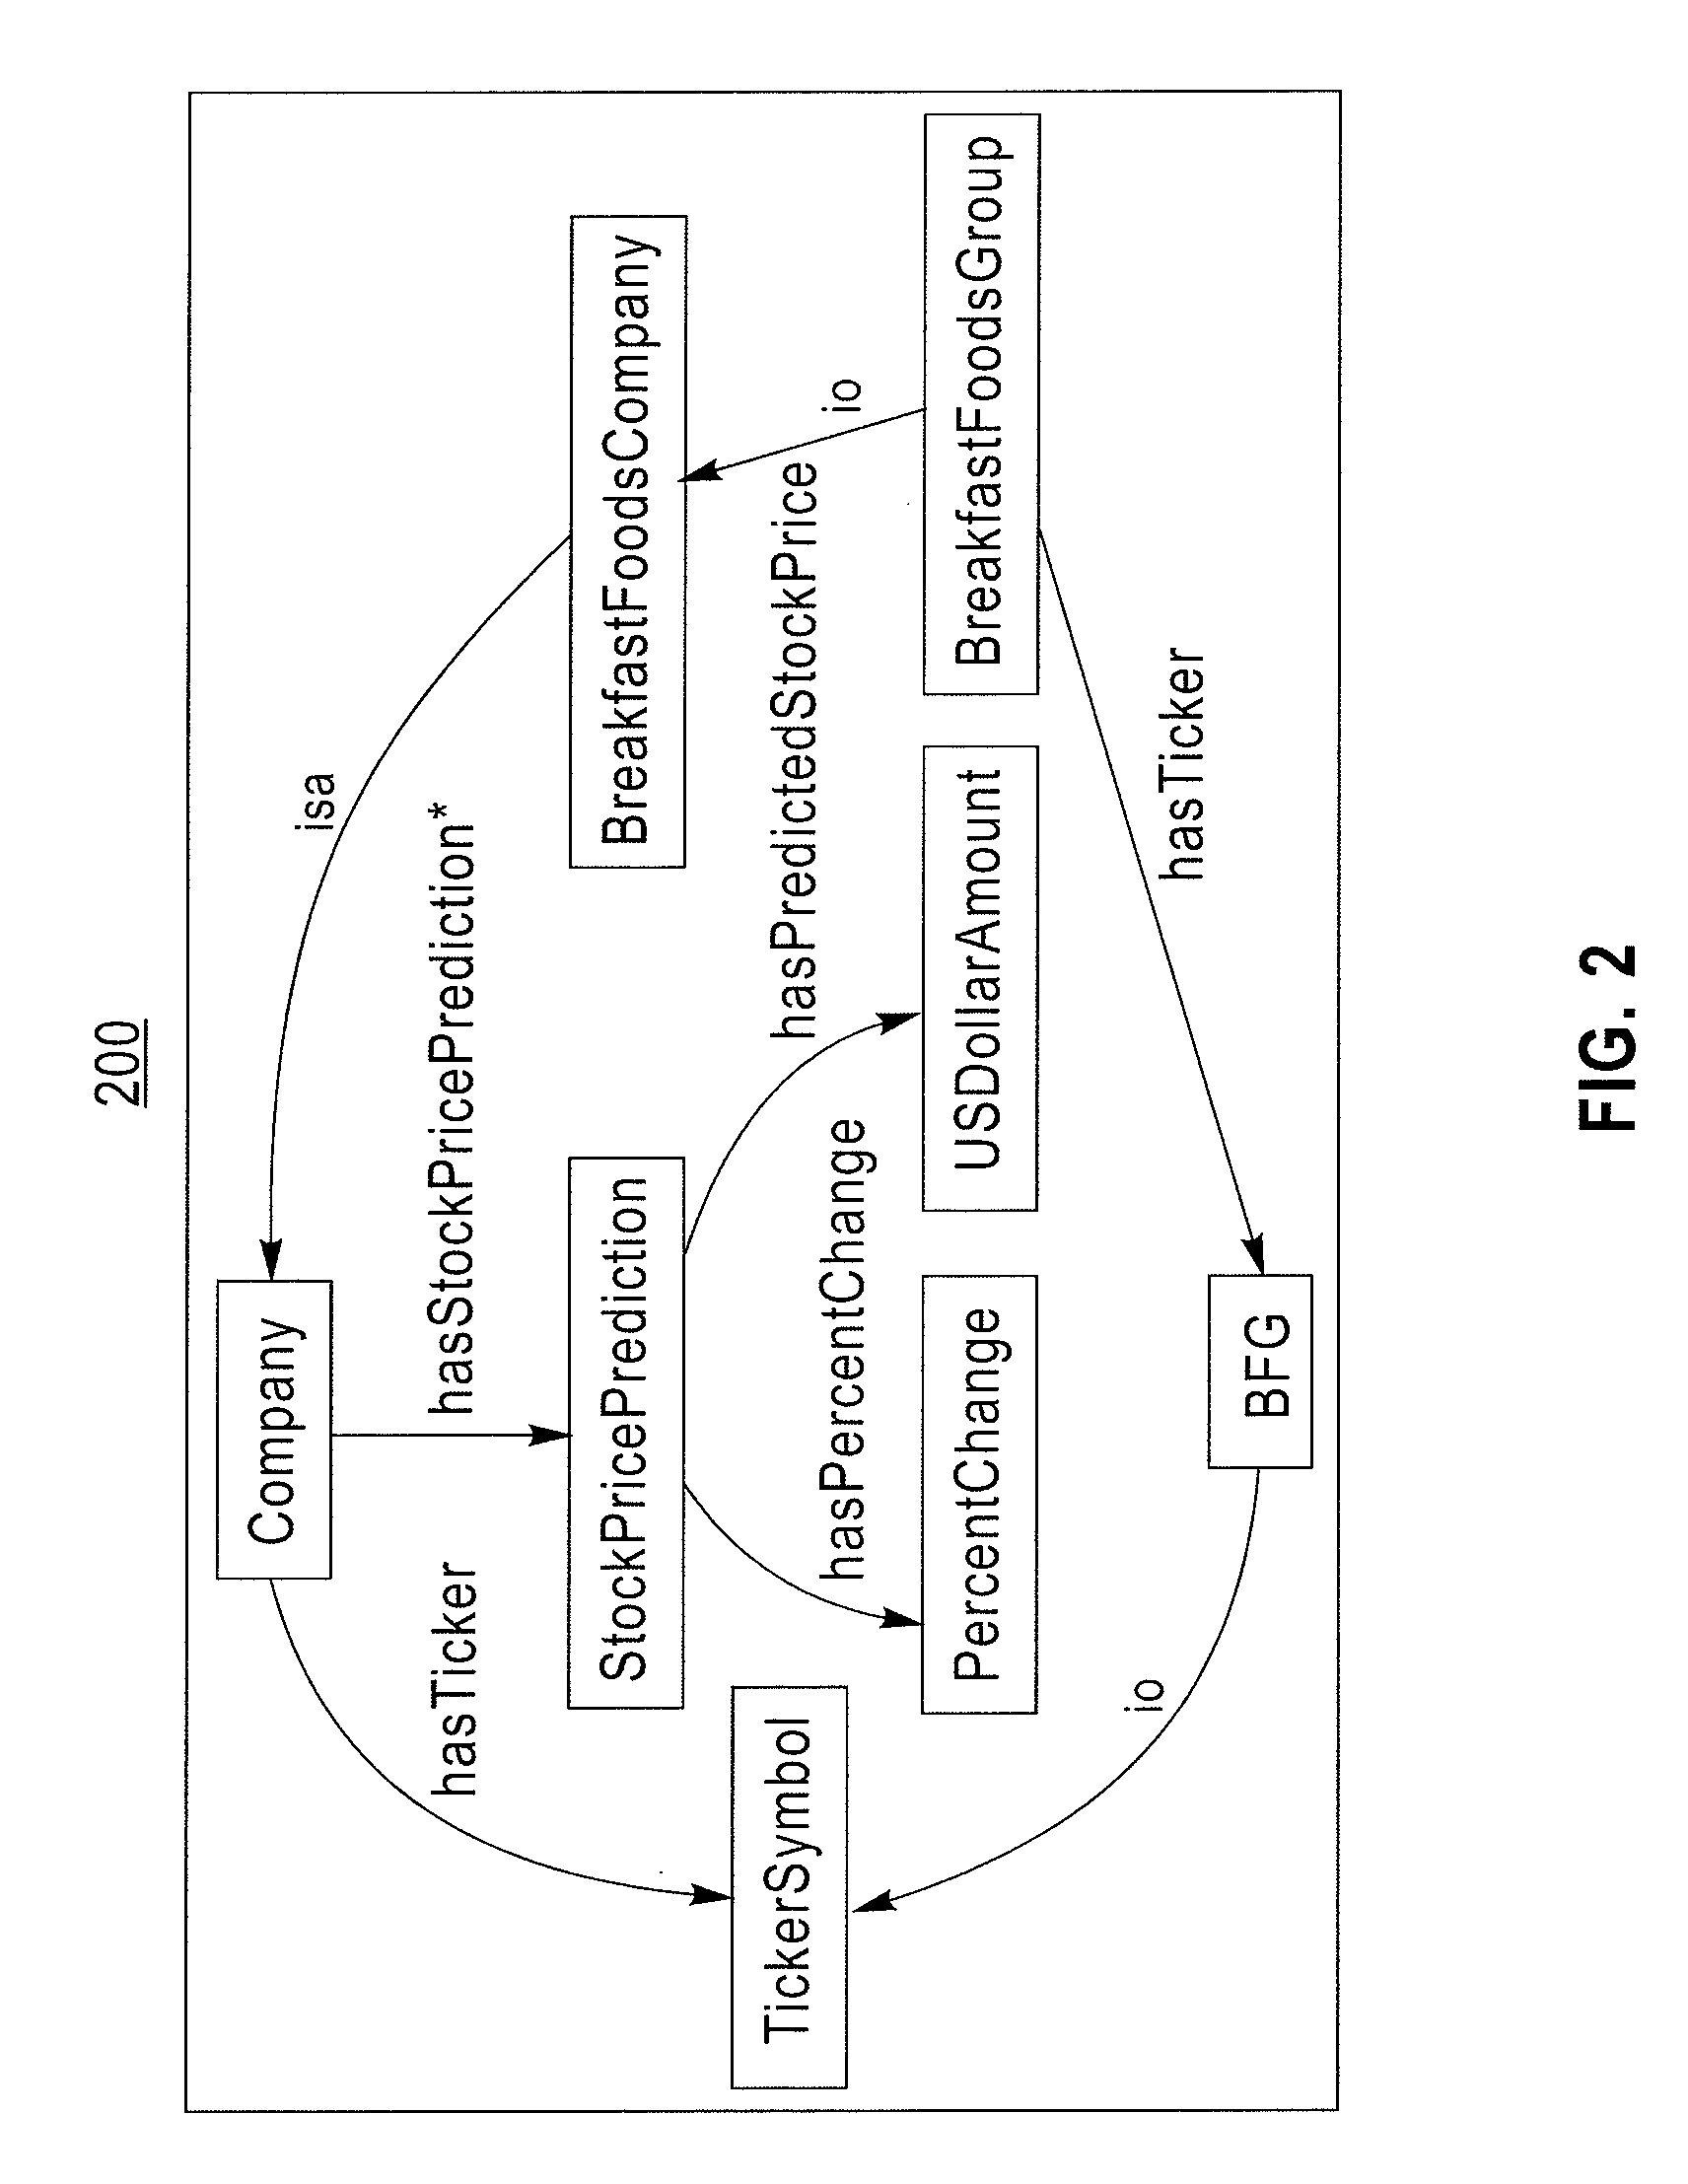 Method for declarative semantic expression of user intent to enable goal-driven information processing